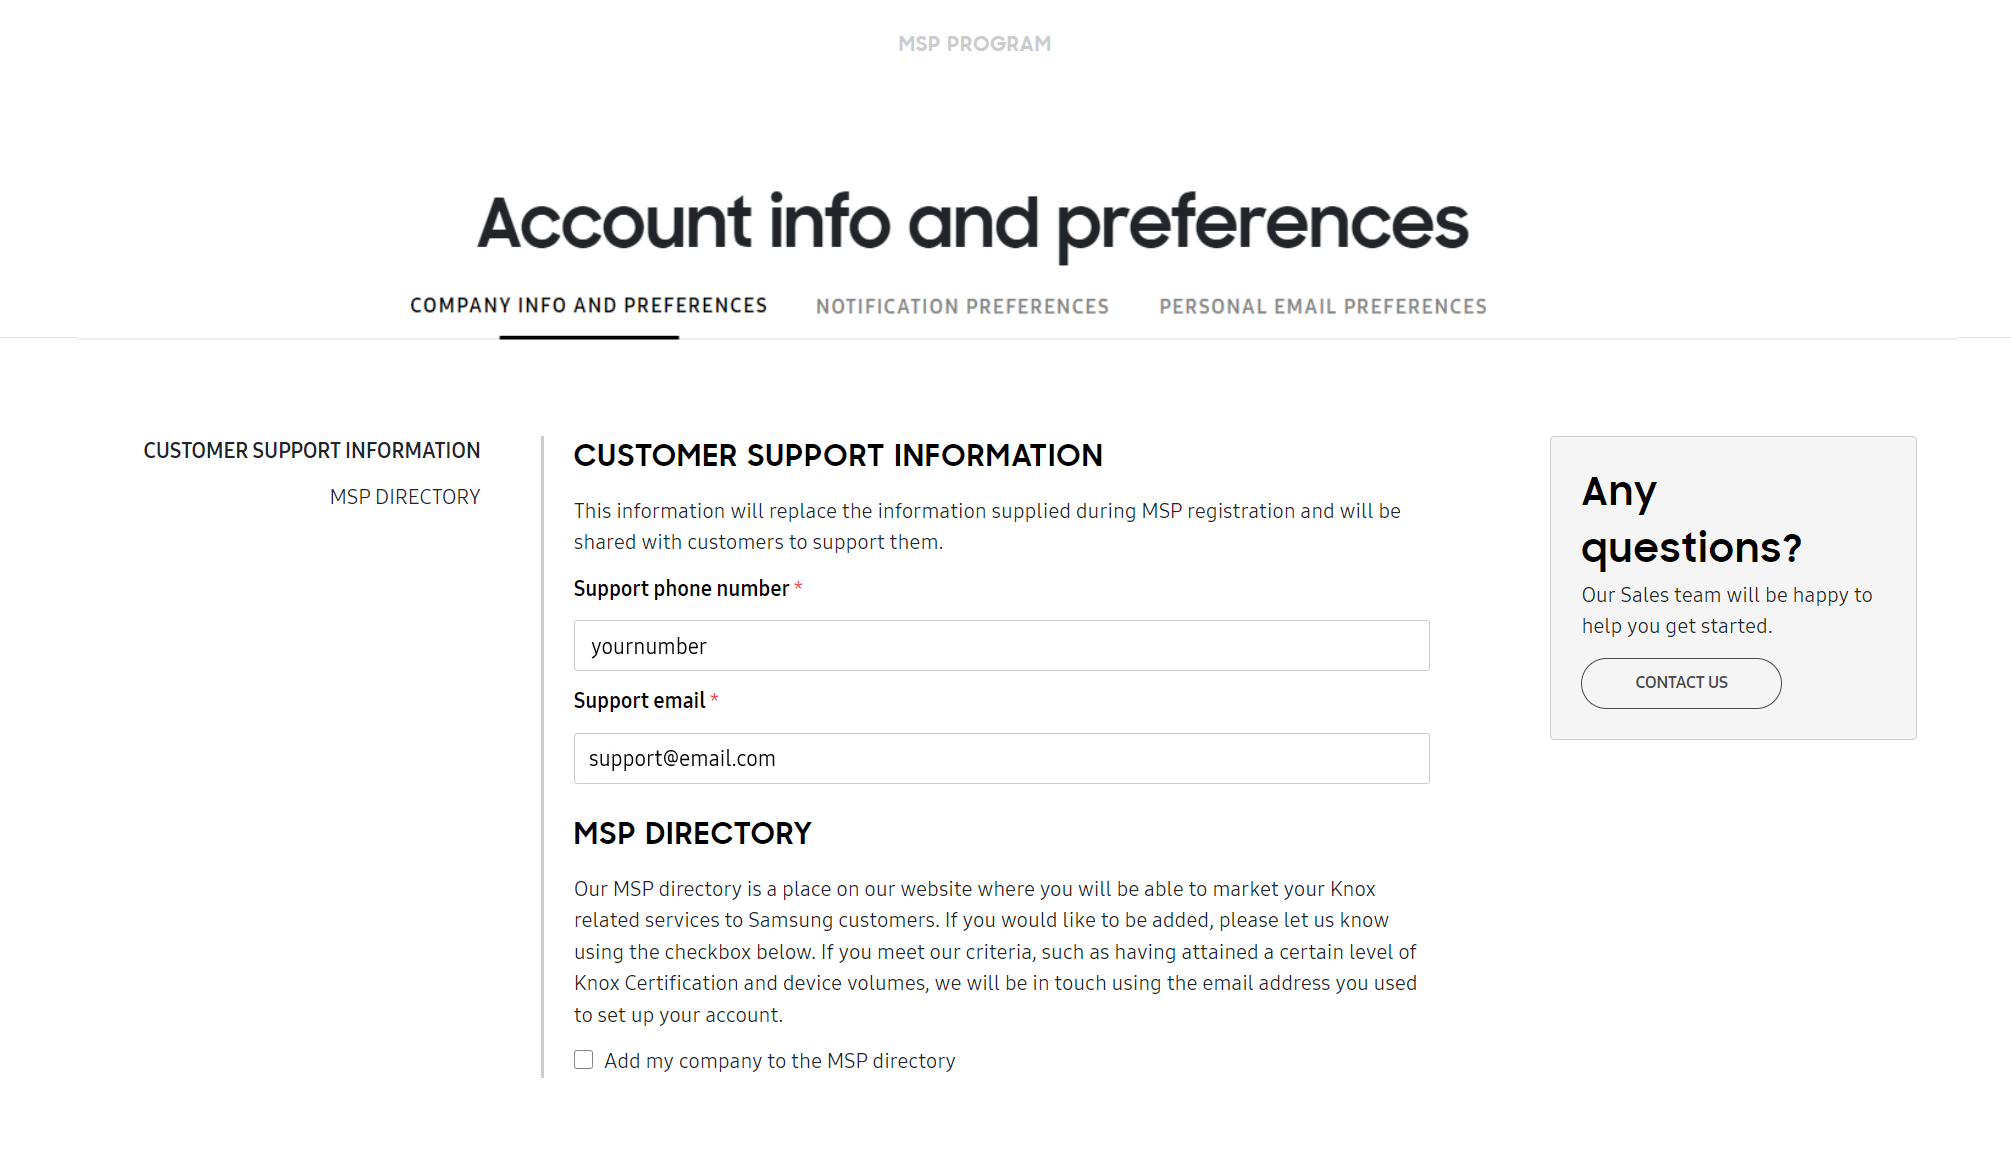 Account preferences